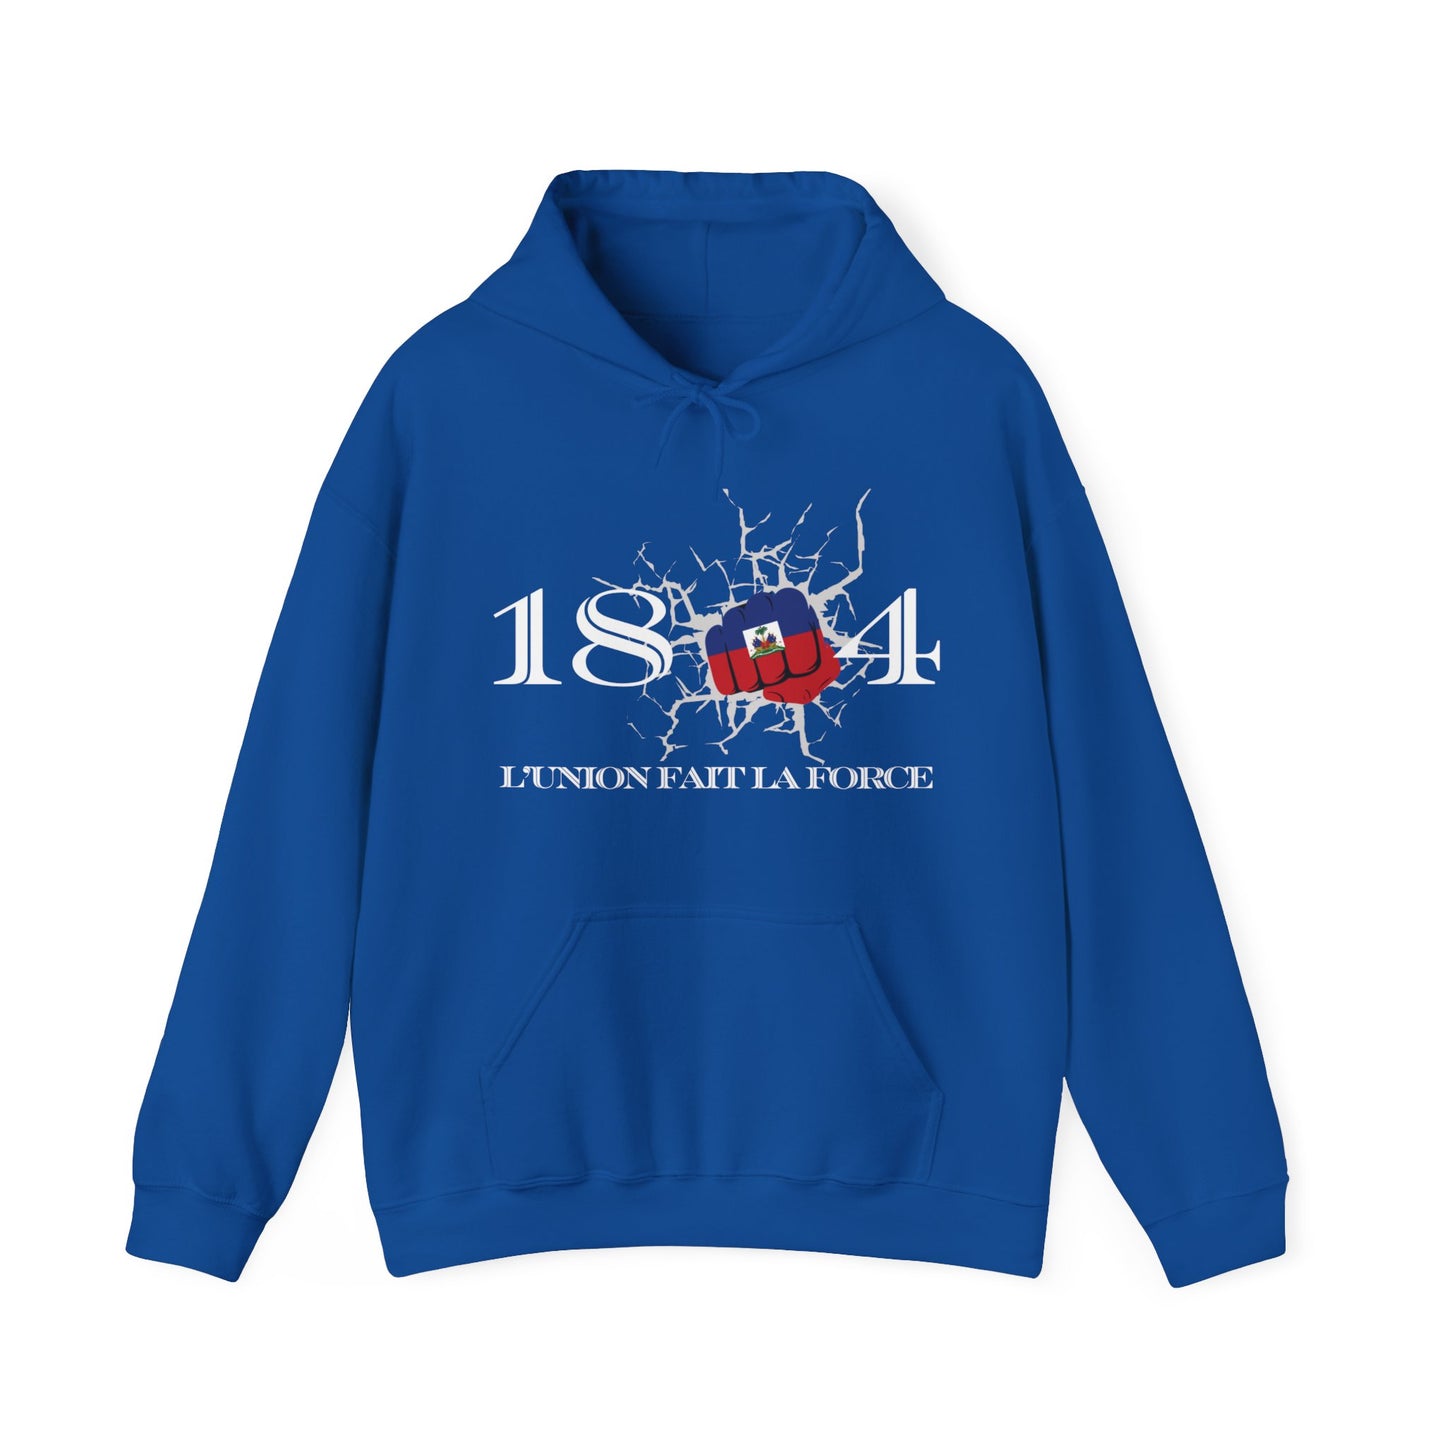 1804 Strong - Hoodie